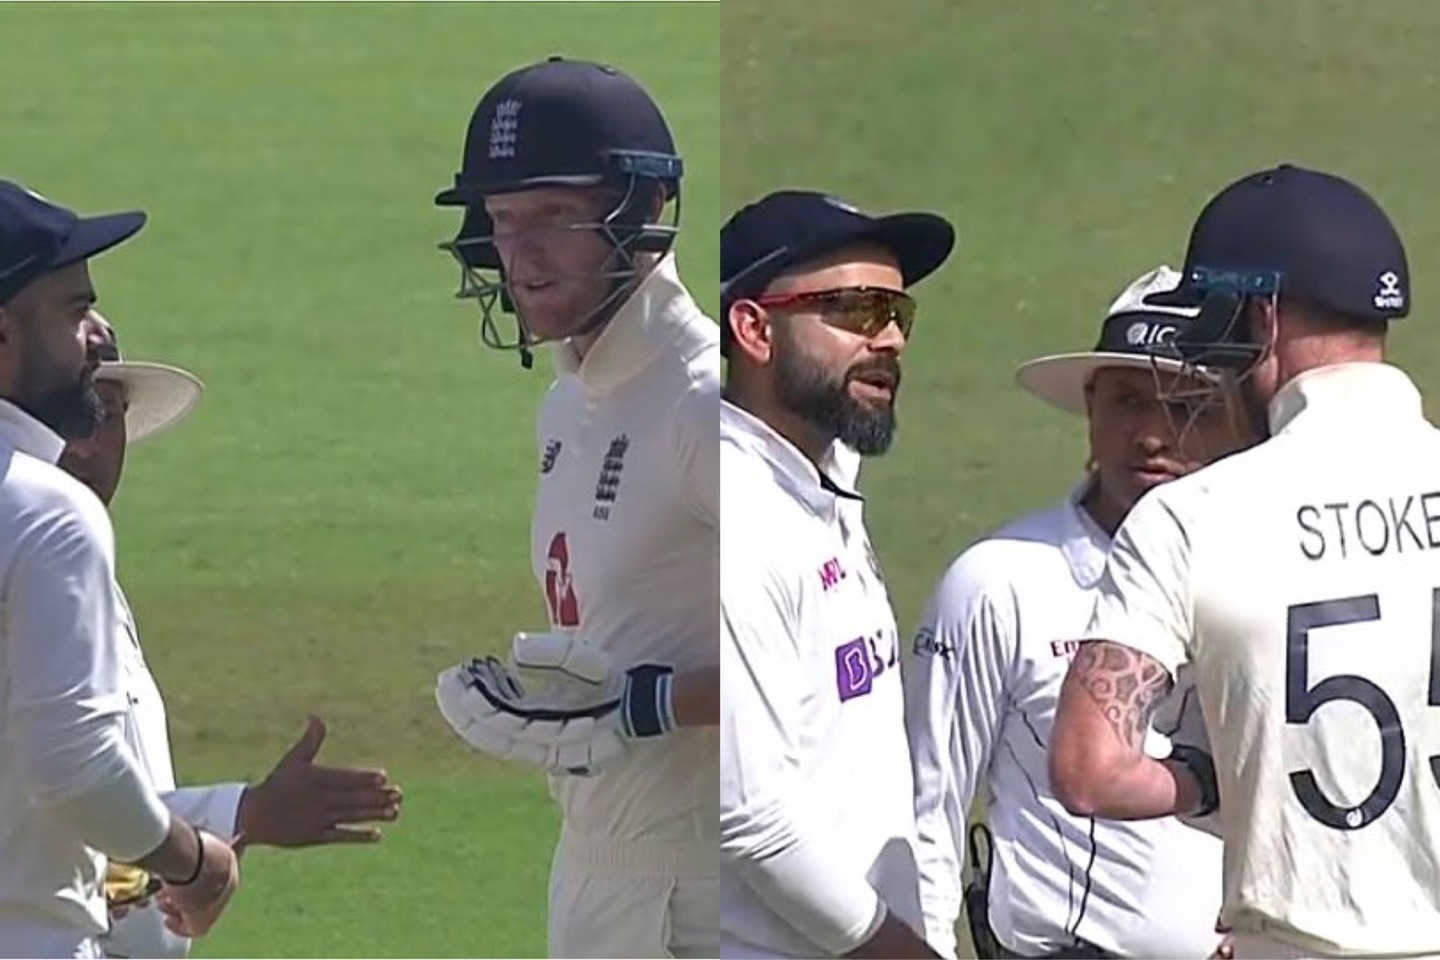 Kohli and Stokes involved in a verbal duel | BCCI/Screengrab